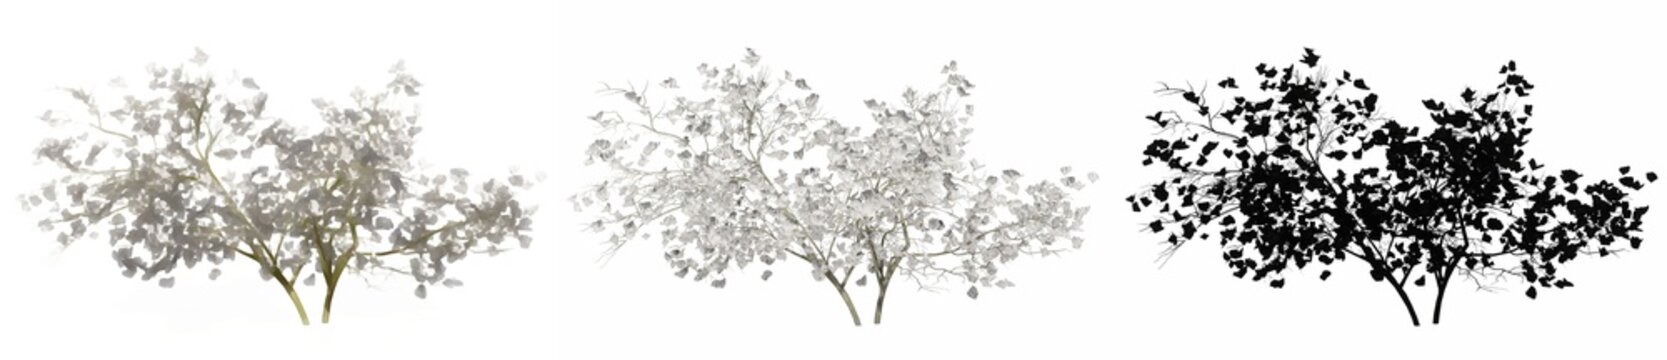 Set or collection of Magnolia Flowers trees, painted, natural and as a black silhouette on white background. Concept or conceptual 3d illustration for nature, ecology and conservation, strength